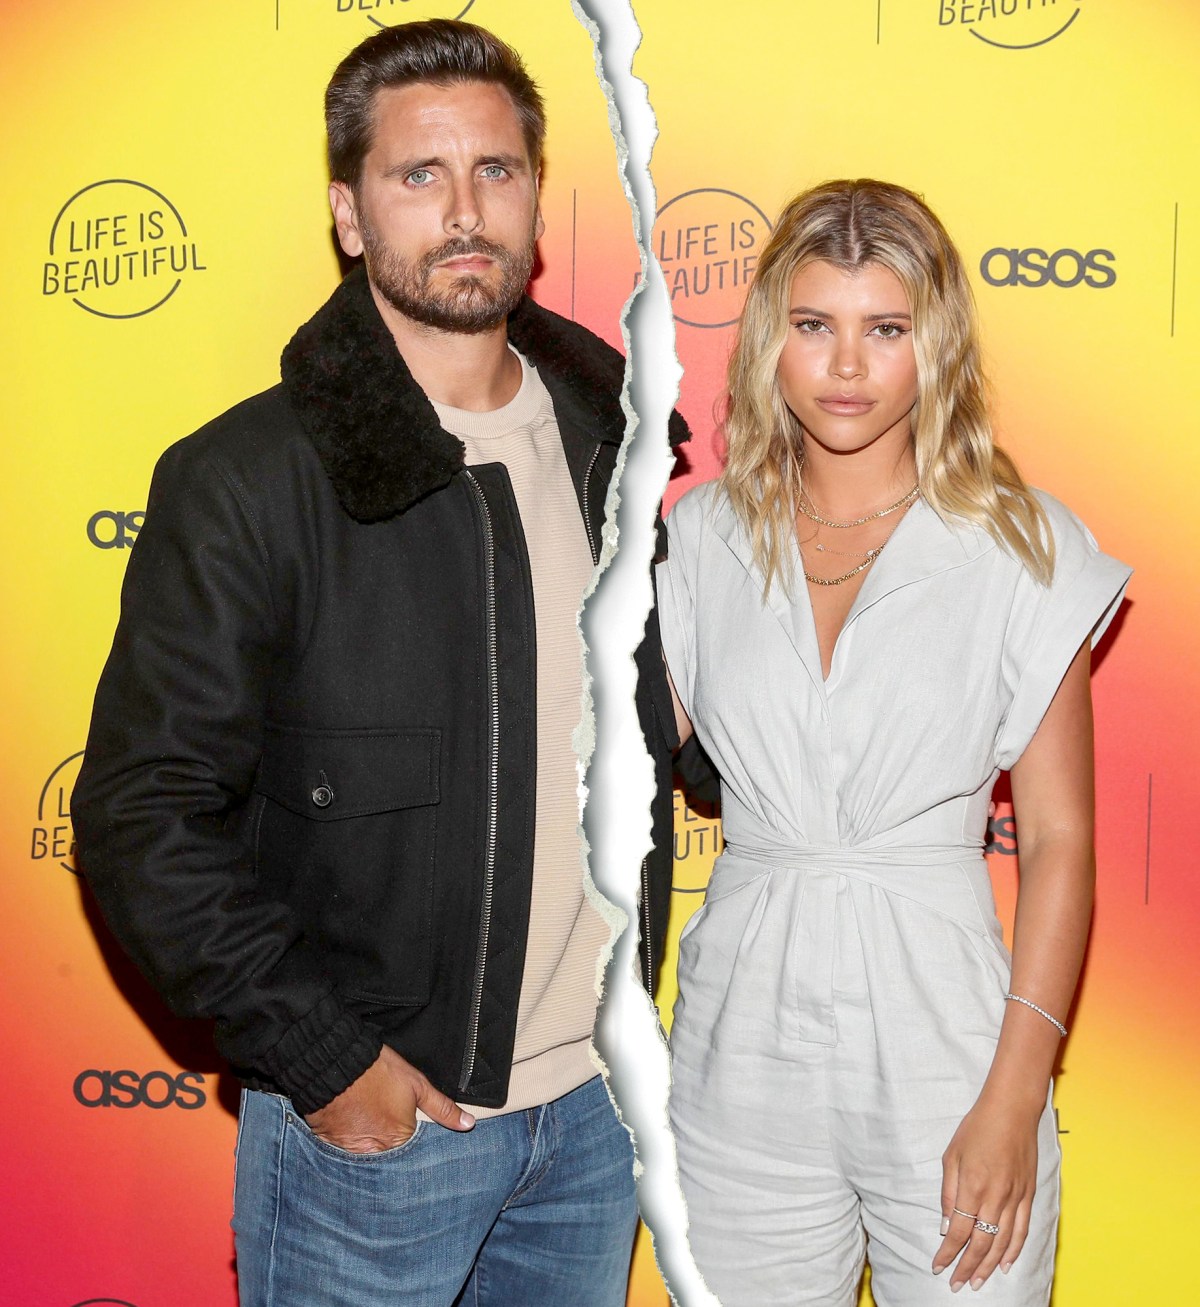 Scott Disick And Sofia Richie A Timeline Of Their Relationship